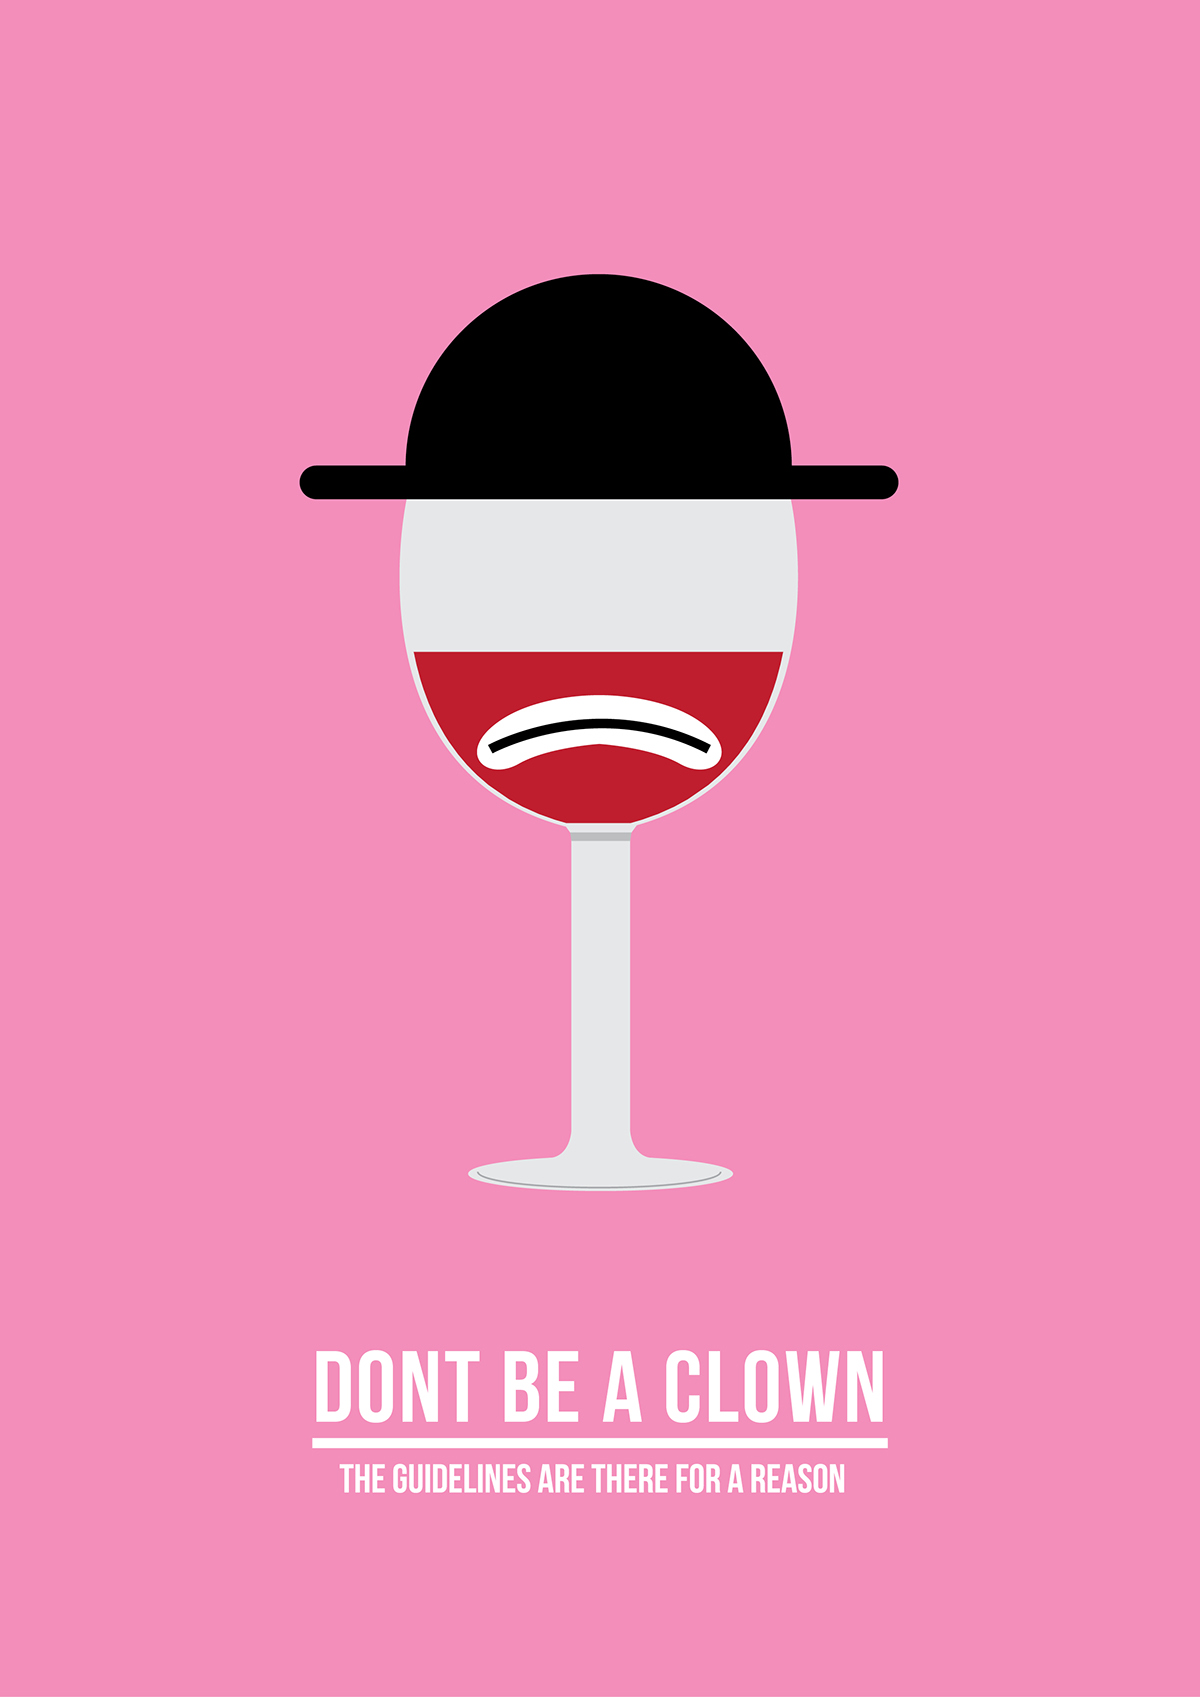 alcohol clown funny poster creative wine beer Martini